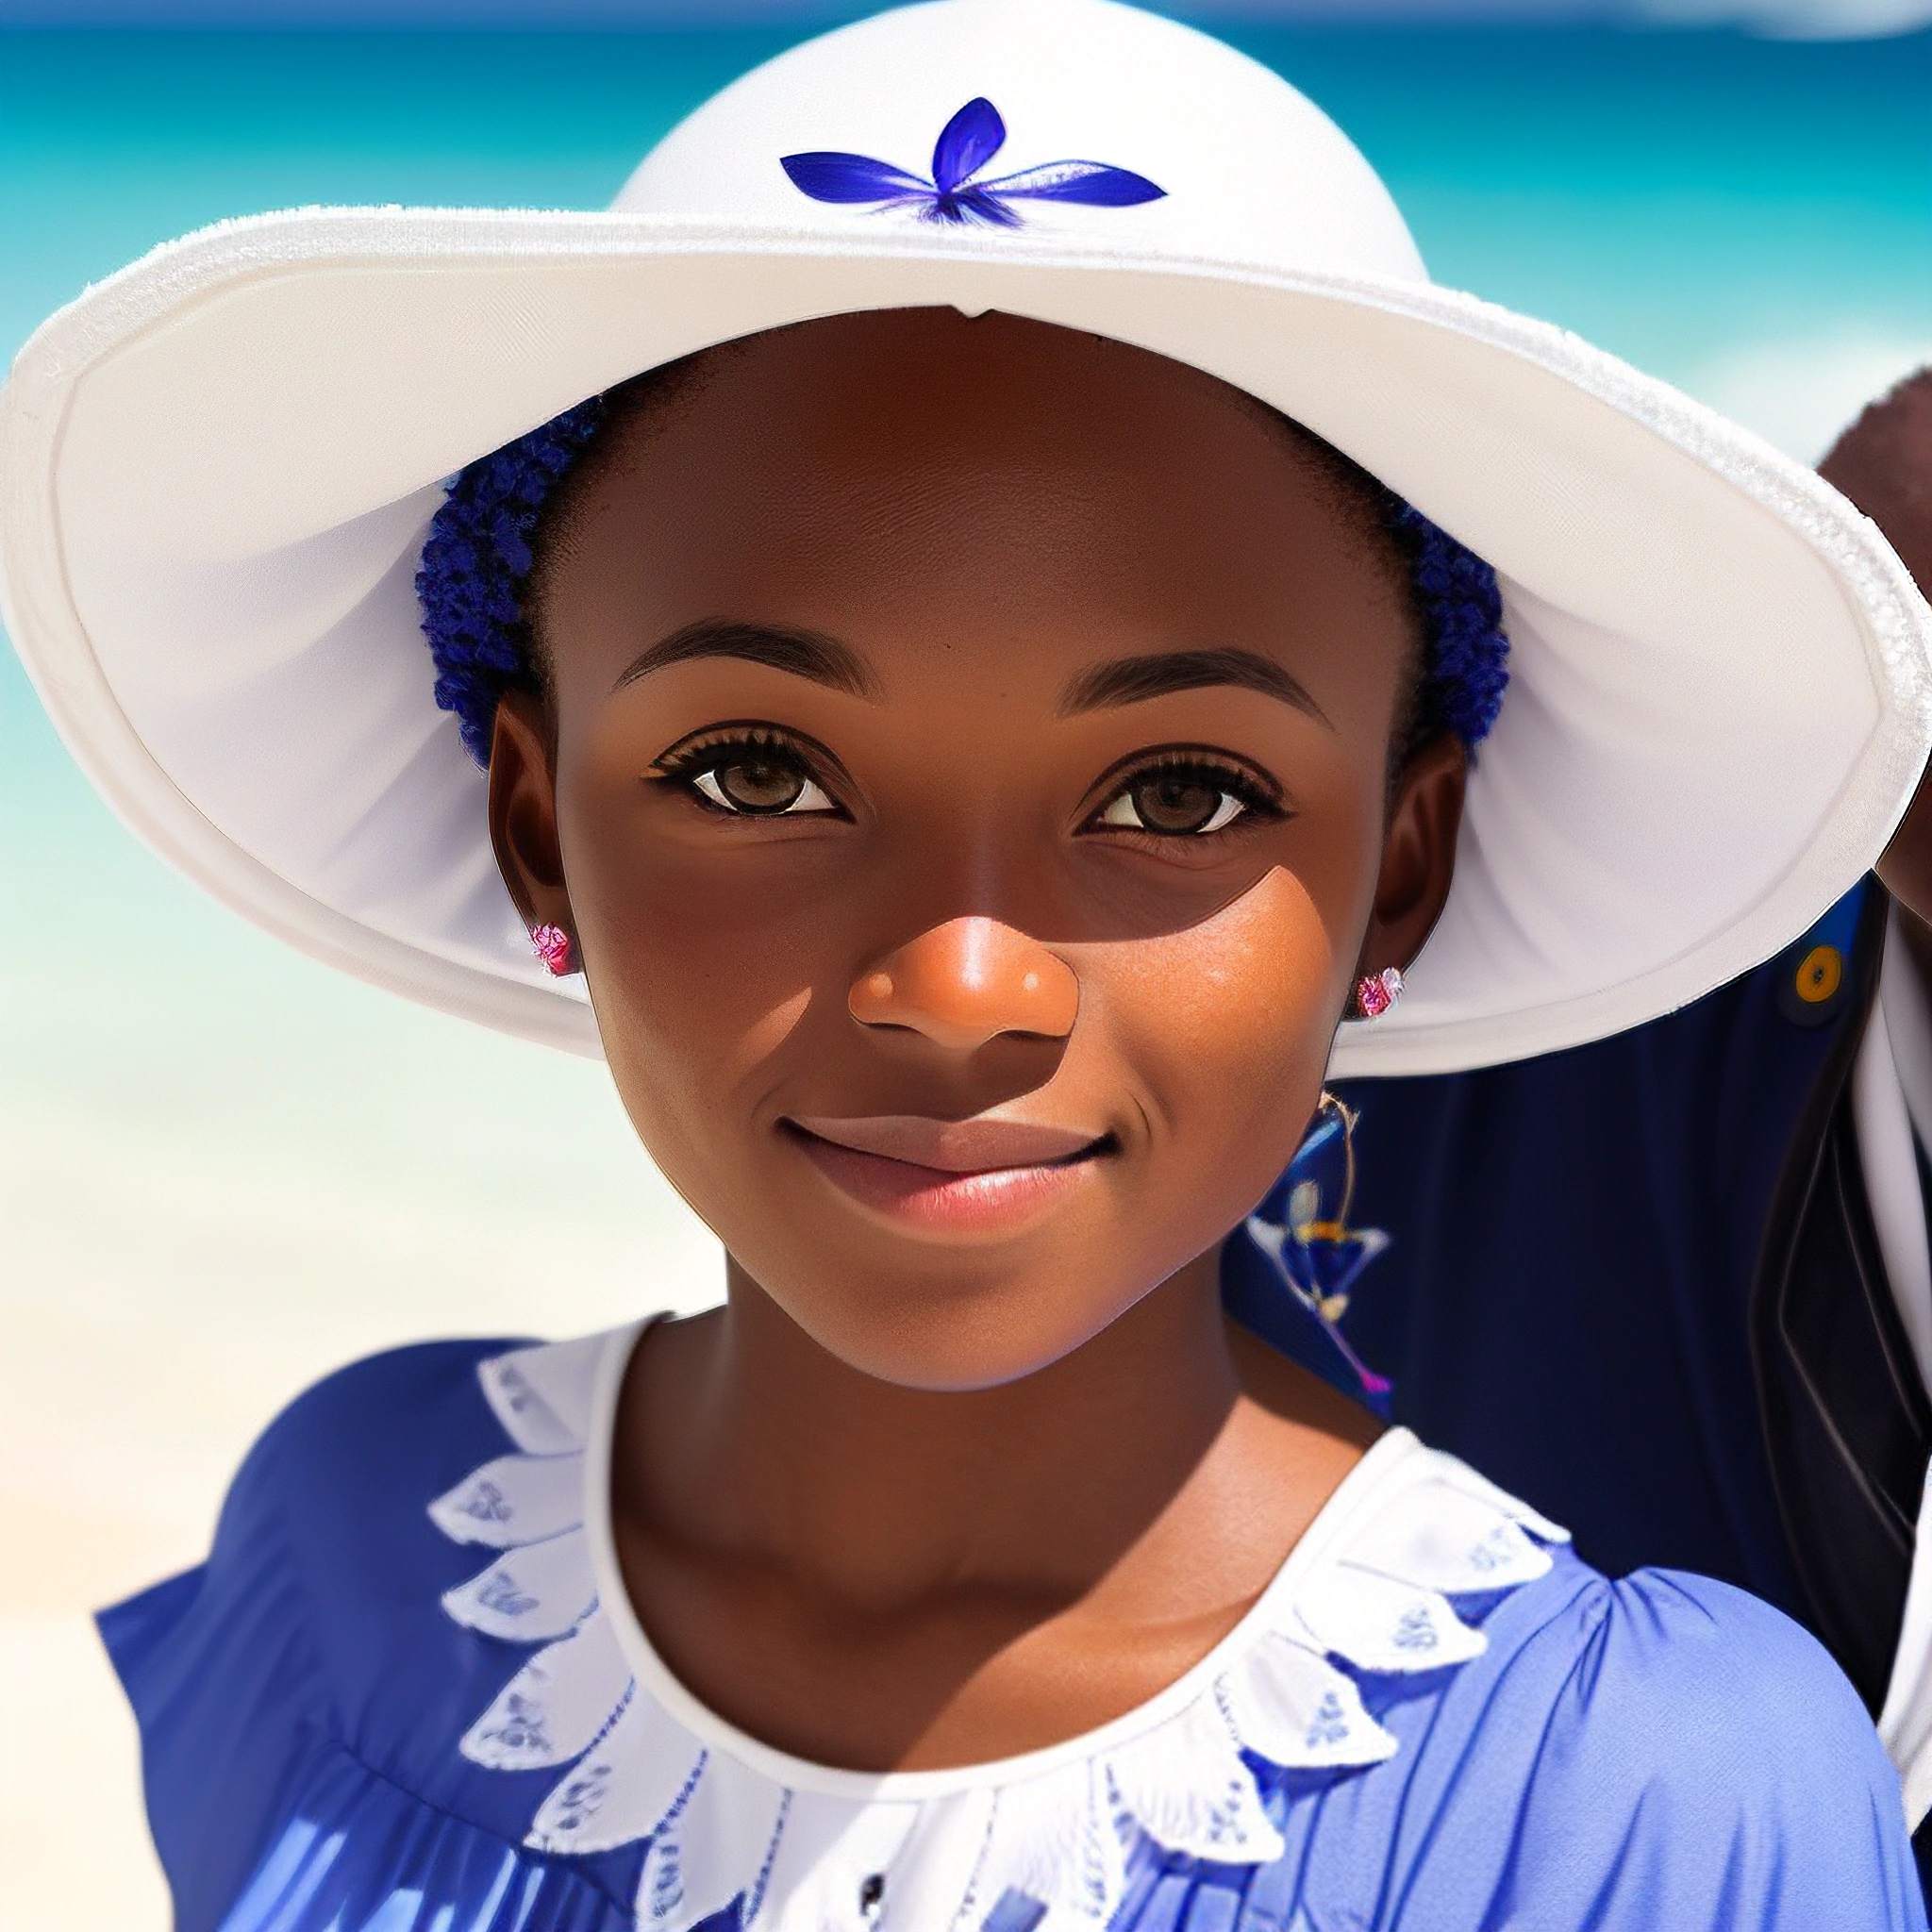 a young girl wearing a white hat and blue dress